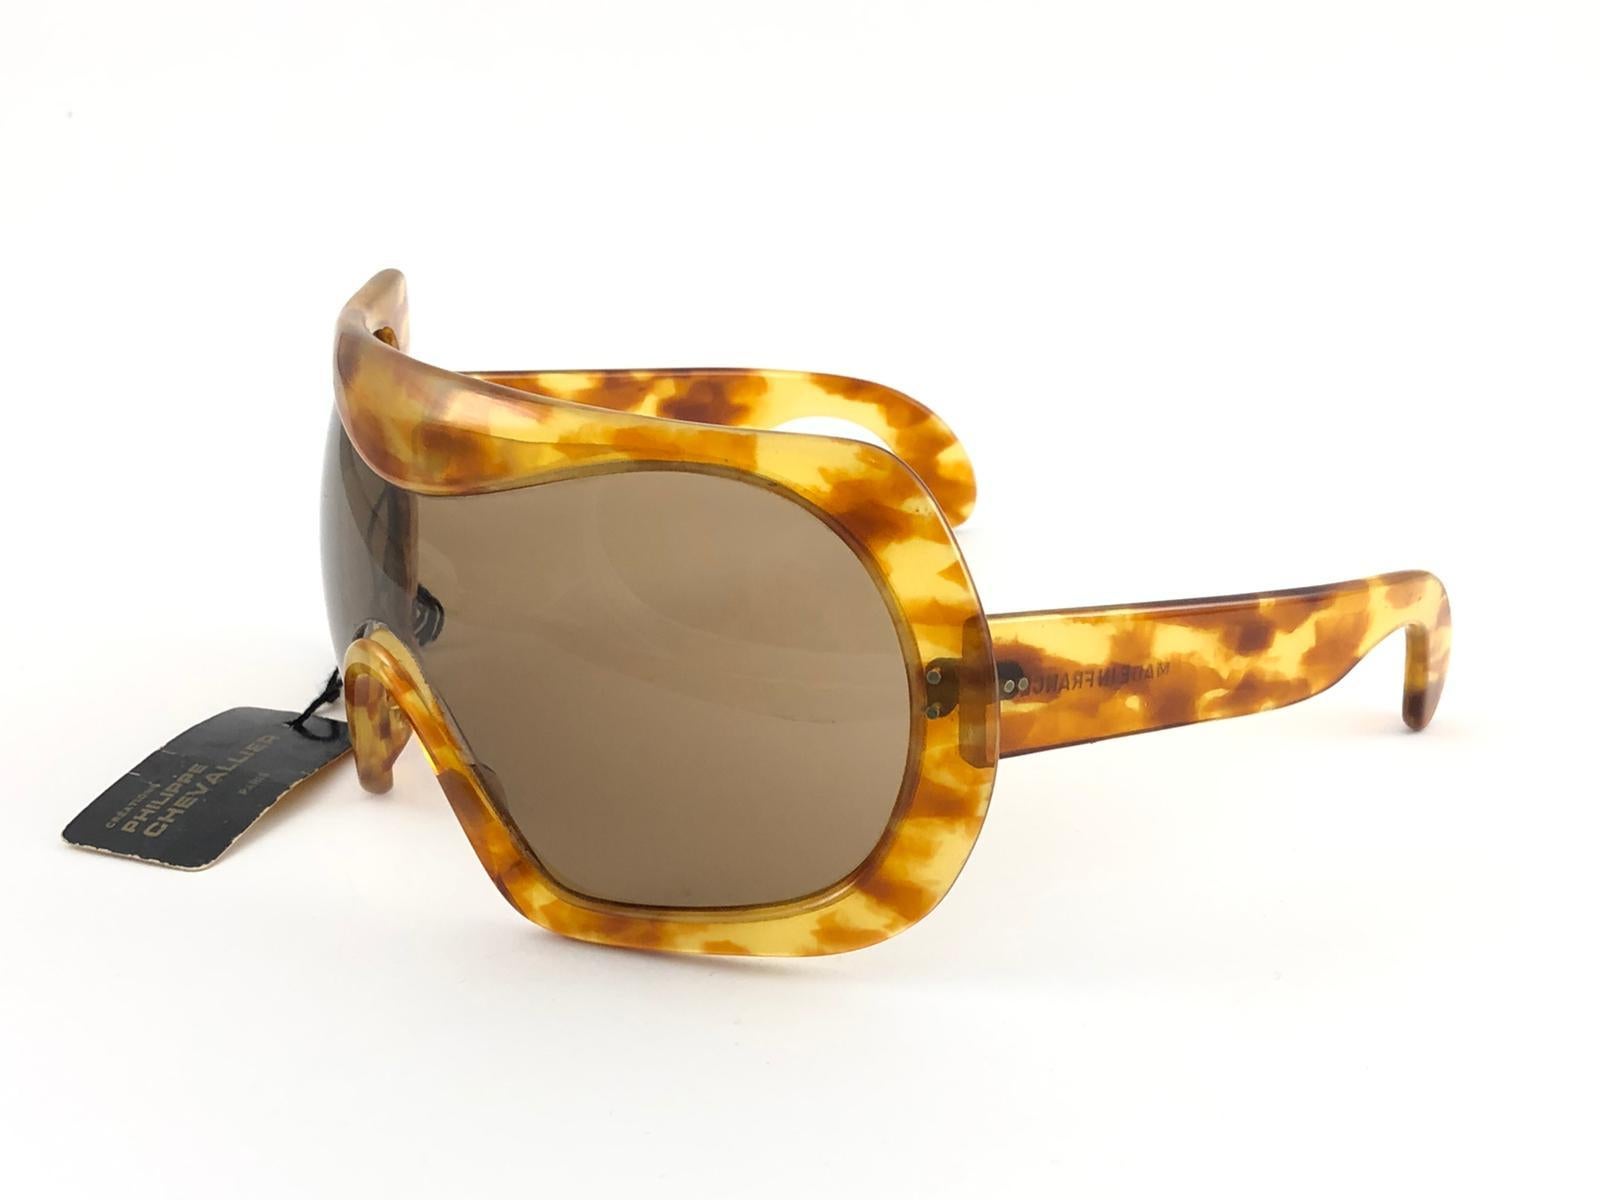 New Vintage Philippe Chevallier II Light Tortoise Miles Davis 1960 Sunglasses In New Condition For Sale In Baleares, Baleares